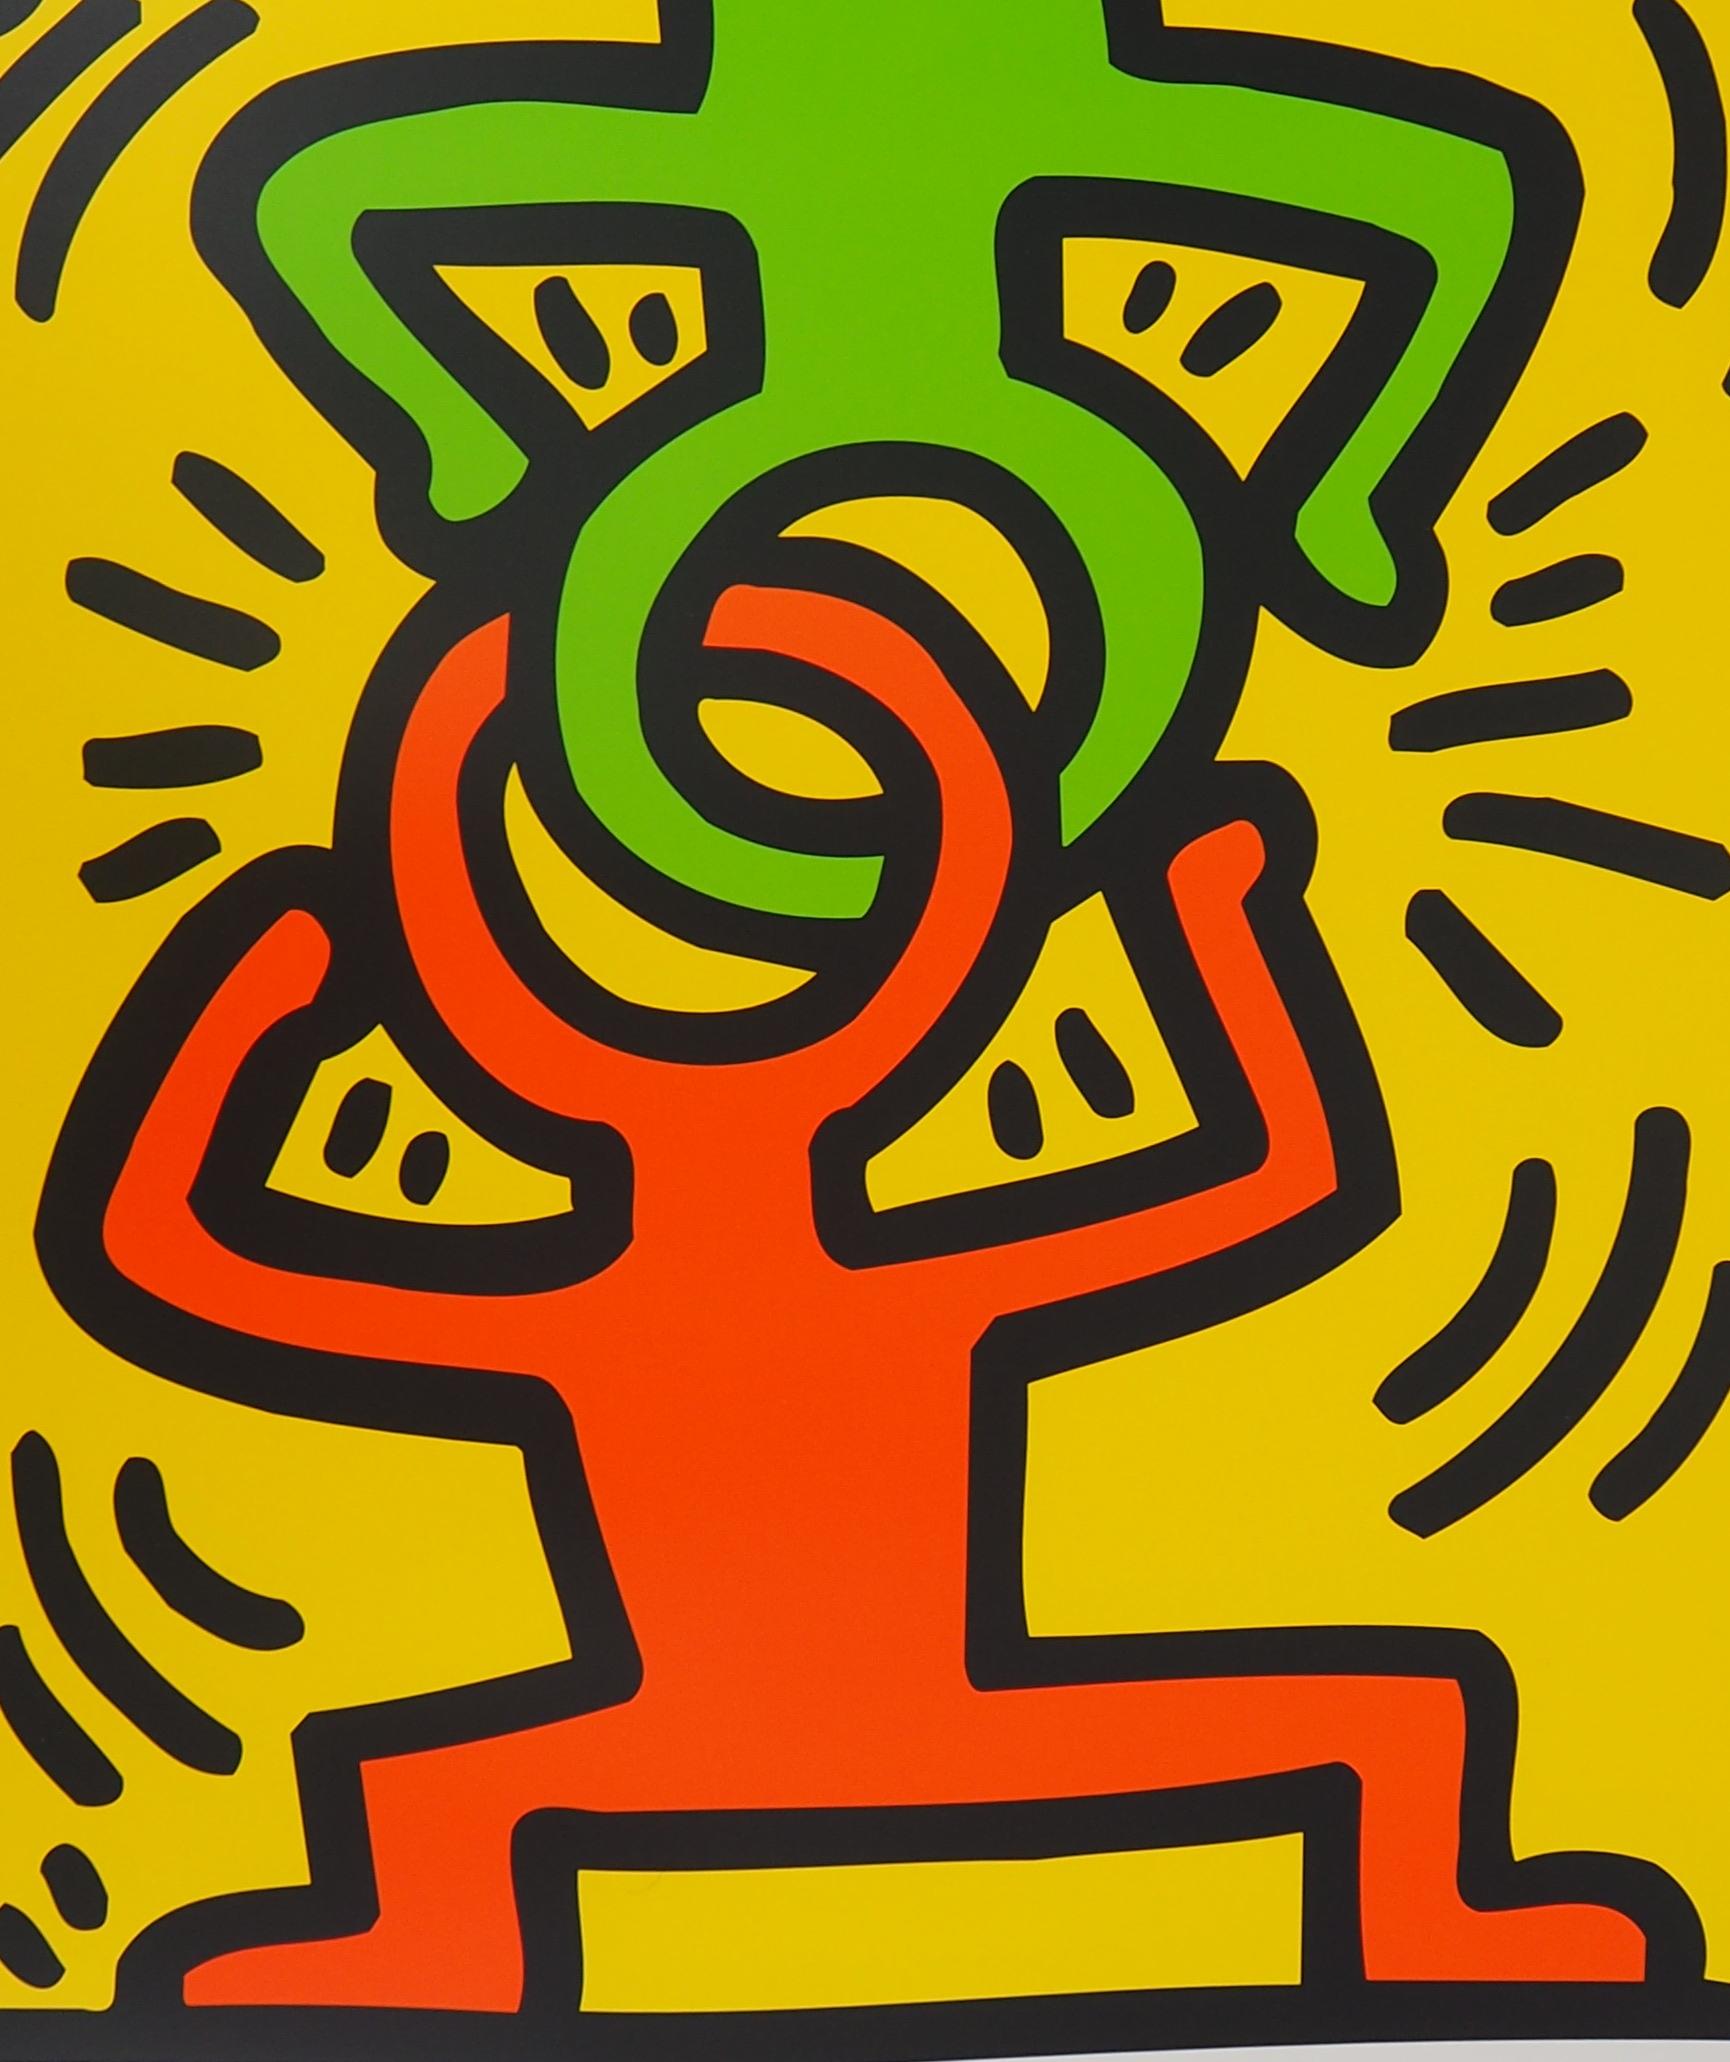 Headstand (San Francisco Museum of Modern Art) - Exhibition Poster - Gray Figurative Print by Keith Haring